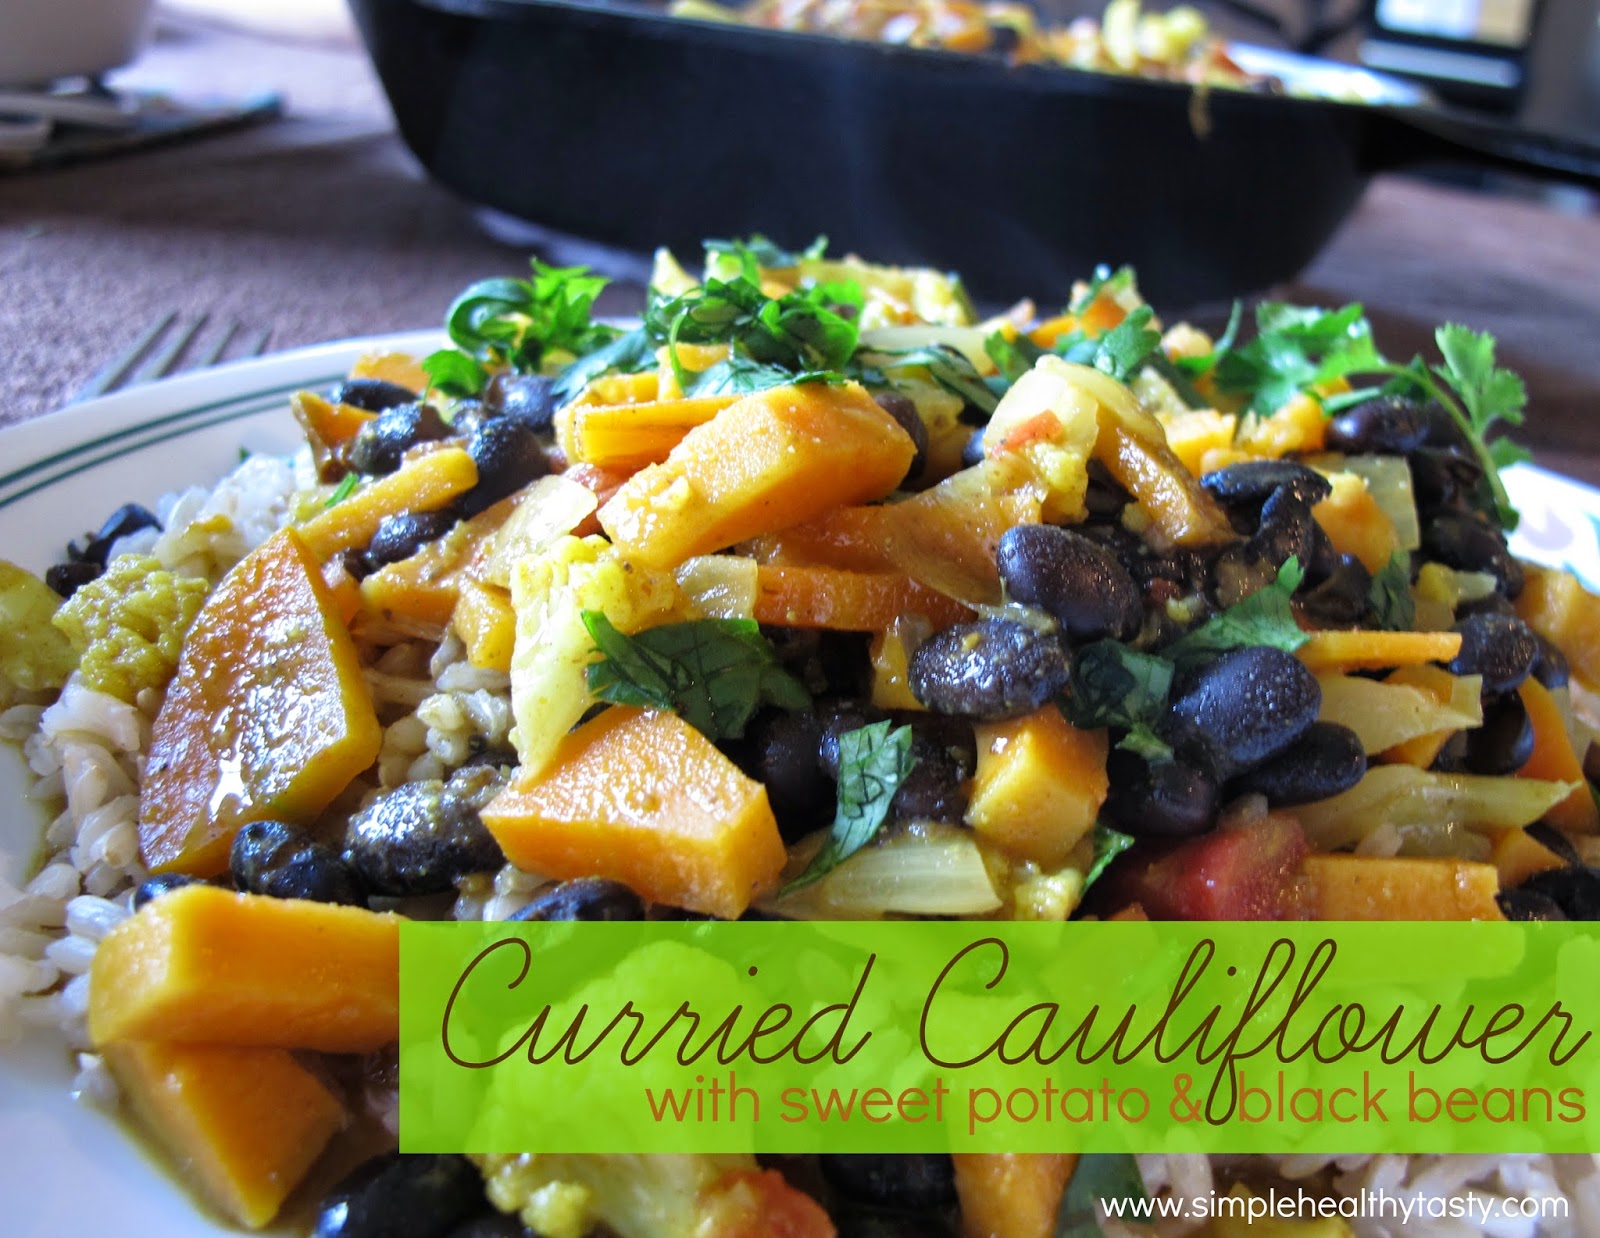 With Sweet Potato and Black Beans